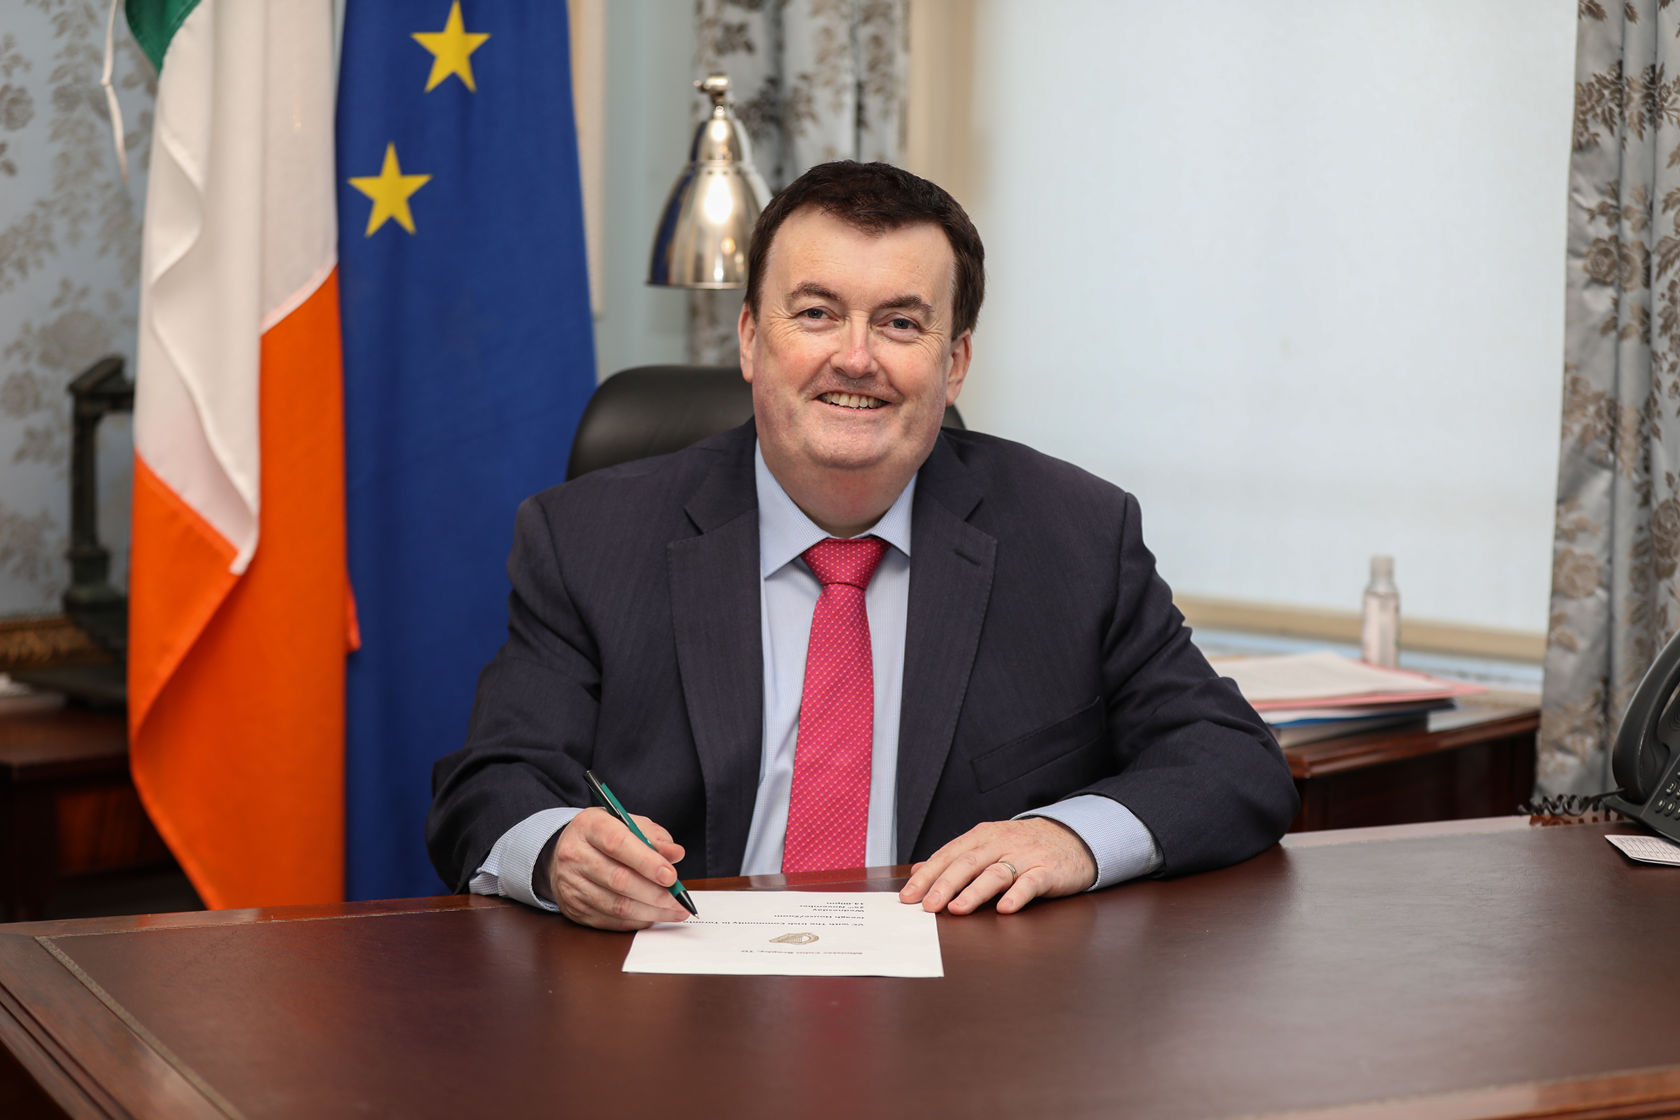 Global Irish Newsletter 15 March 2021 - a Message from Minister Brophy